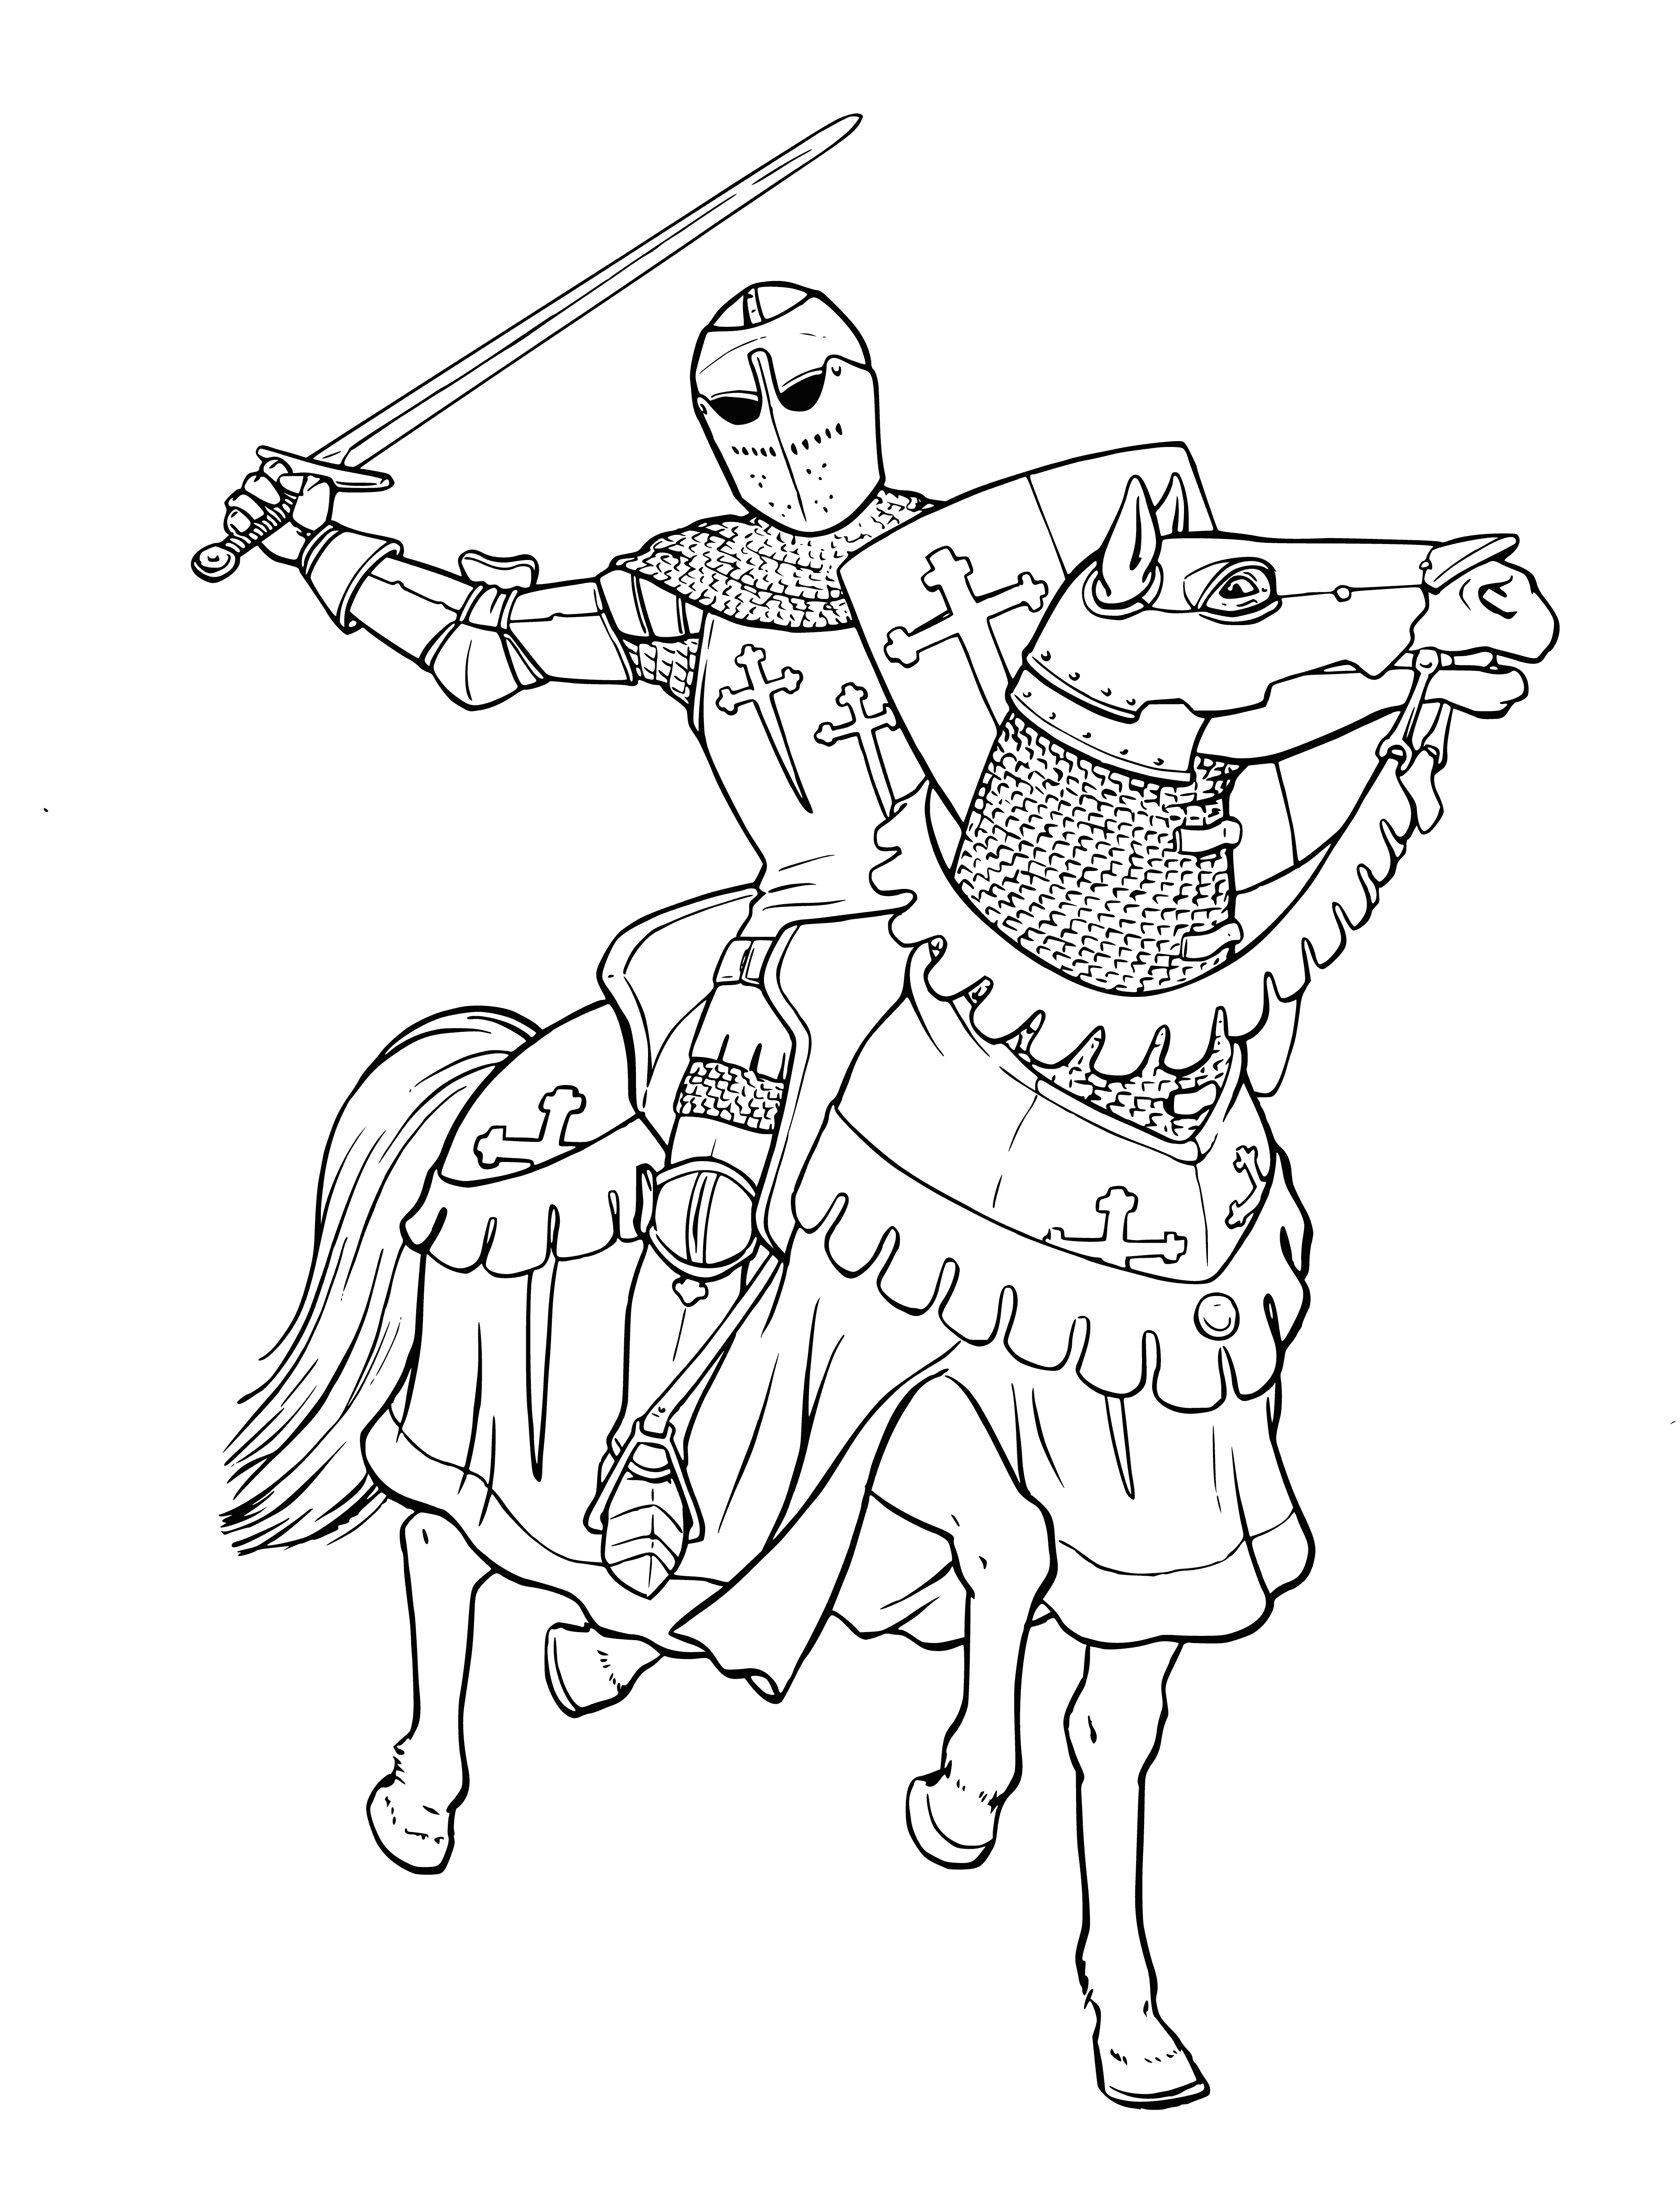 coloring page: Knights on horseback arrayed for battle, each armored & adorned differently. A few dozen, ready to fight for their allegiances. #medieval #army